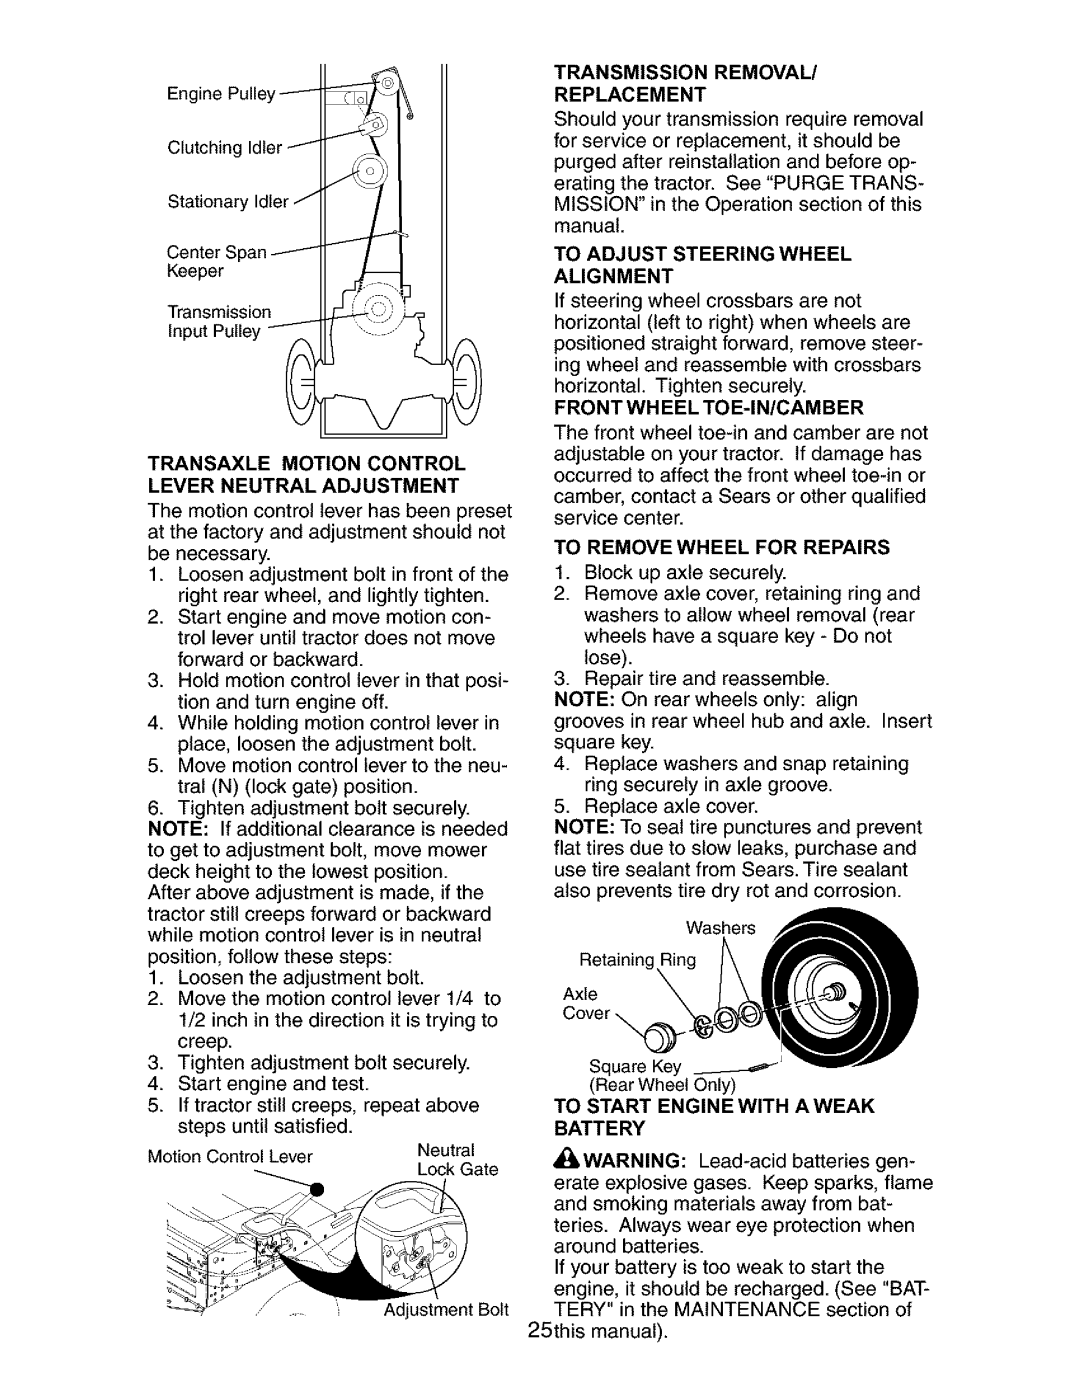 Craftsman 917.27316 owner manual Transmission Removal Replacement, To Adjust Steering Wheel Alignment 